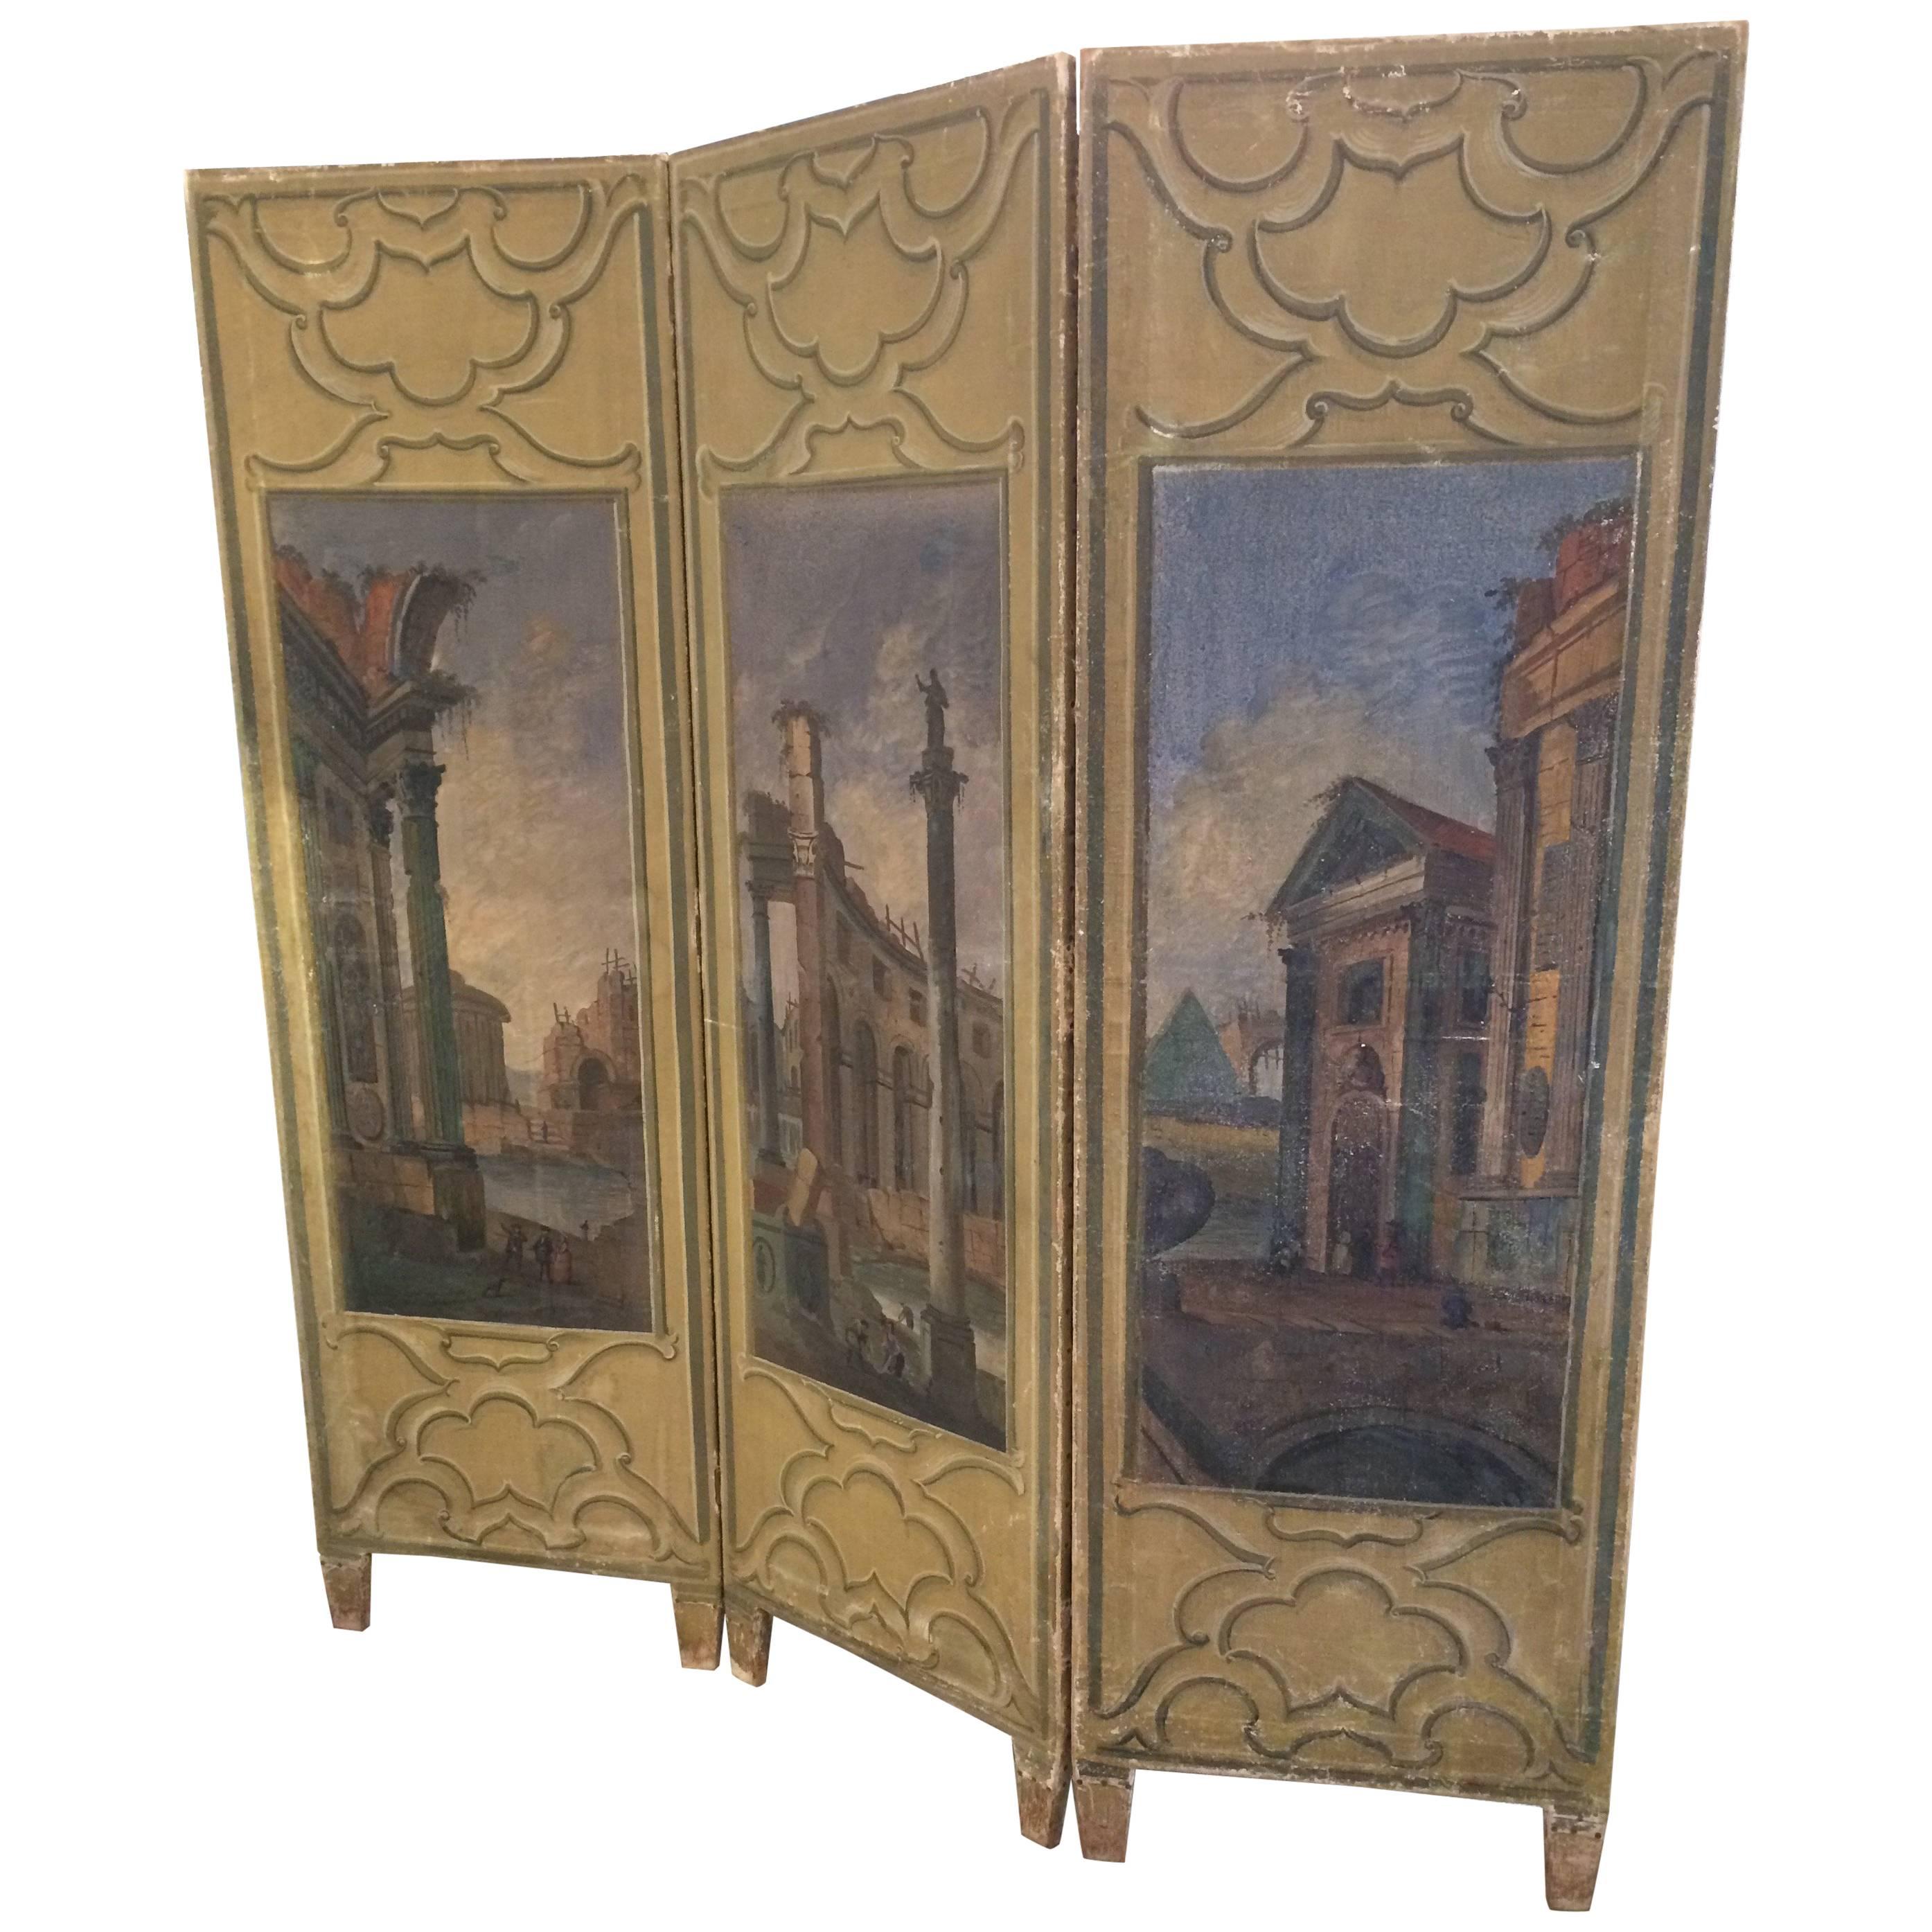 Wonderful 19th Century Continental Painted Screen